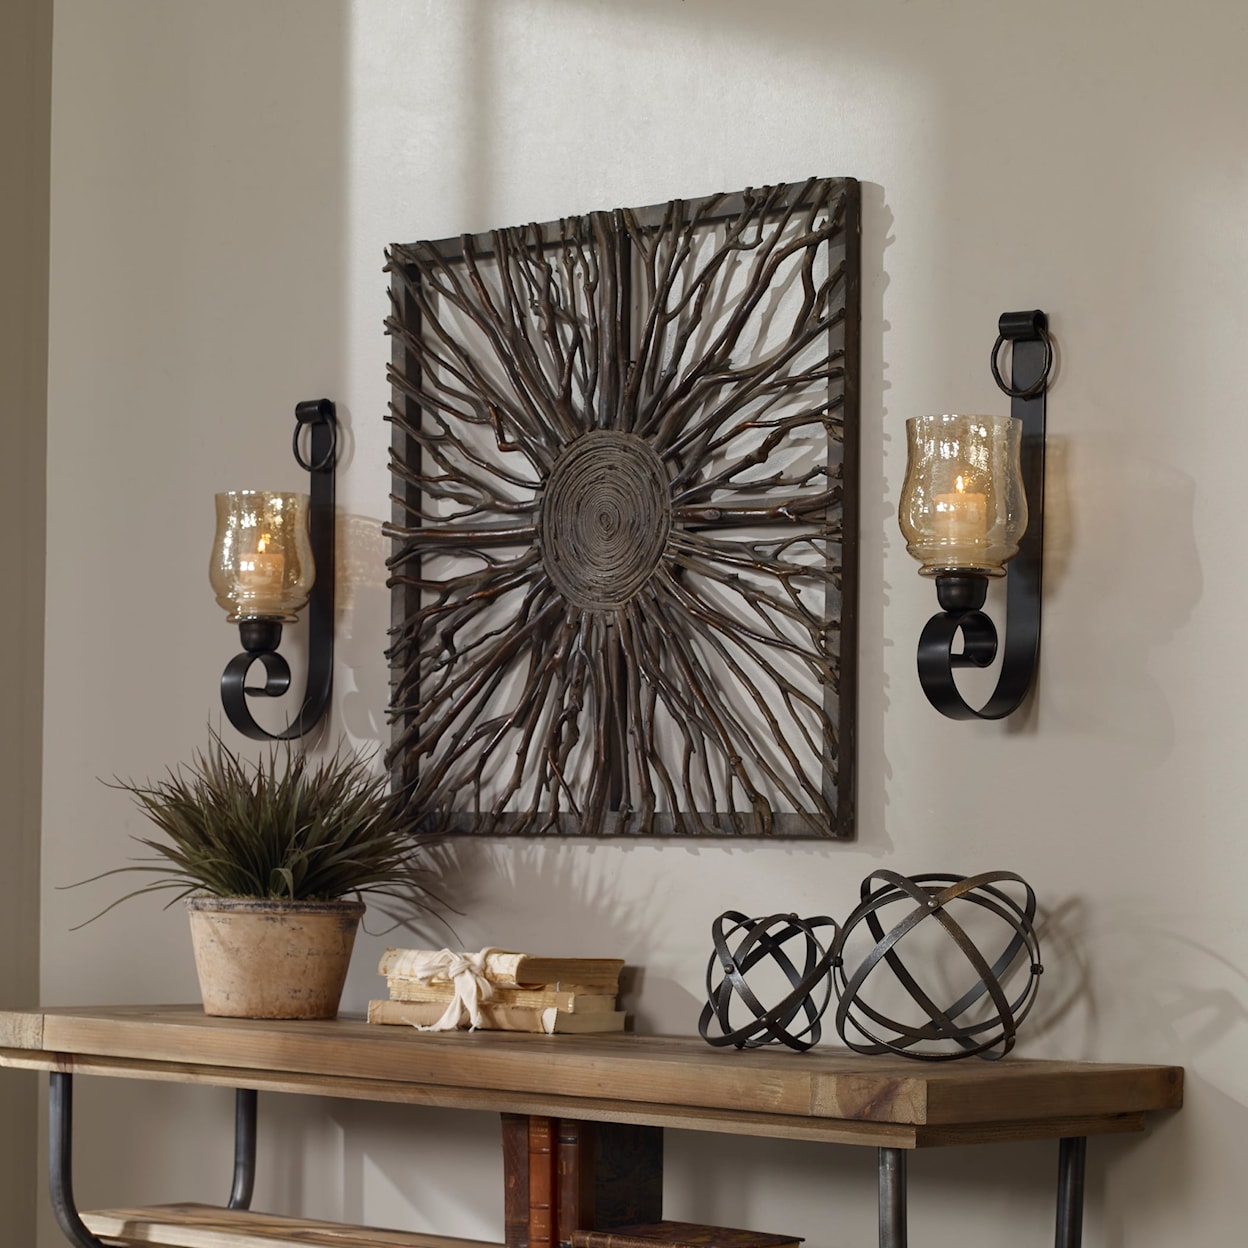 Uttermost Accessories Joselyn Small Wall Sconces Set of 2